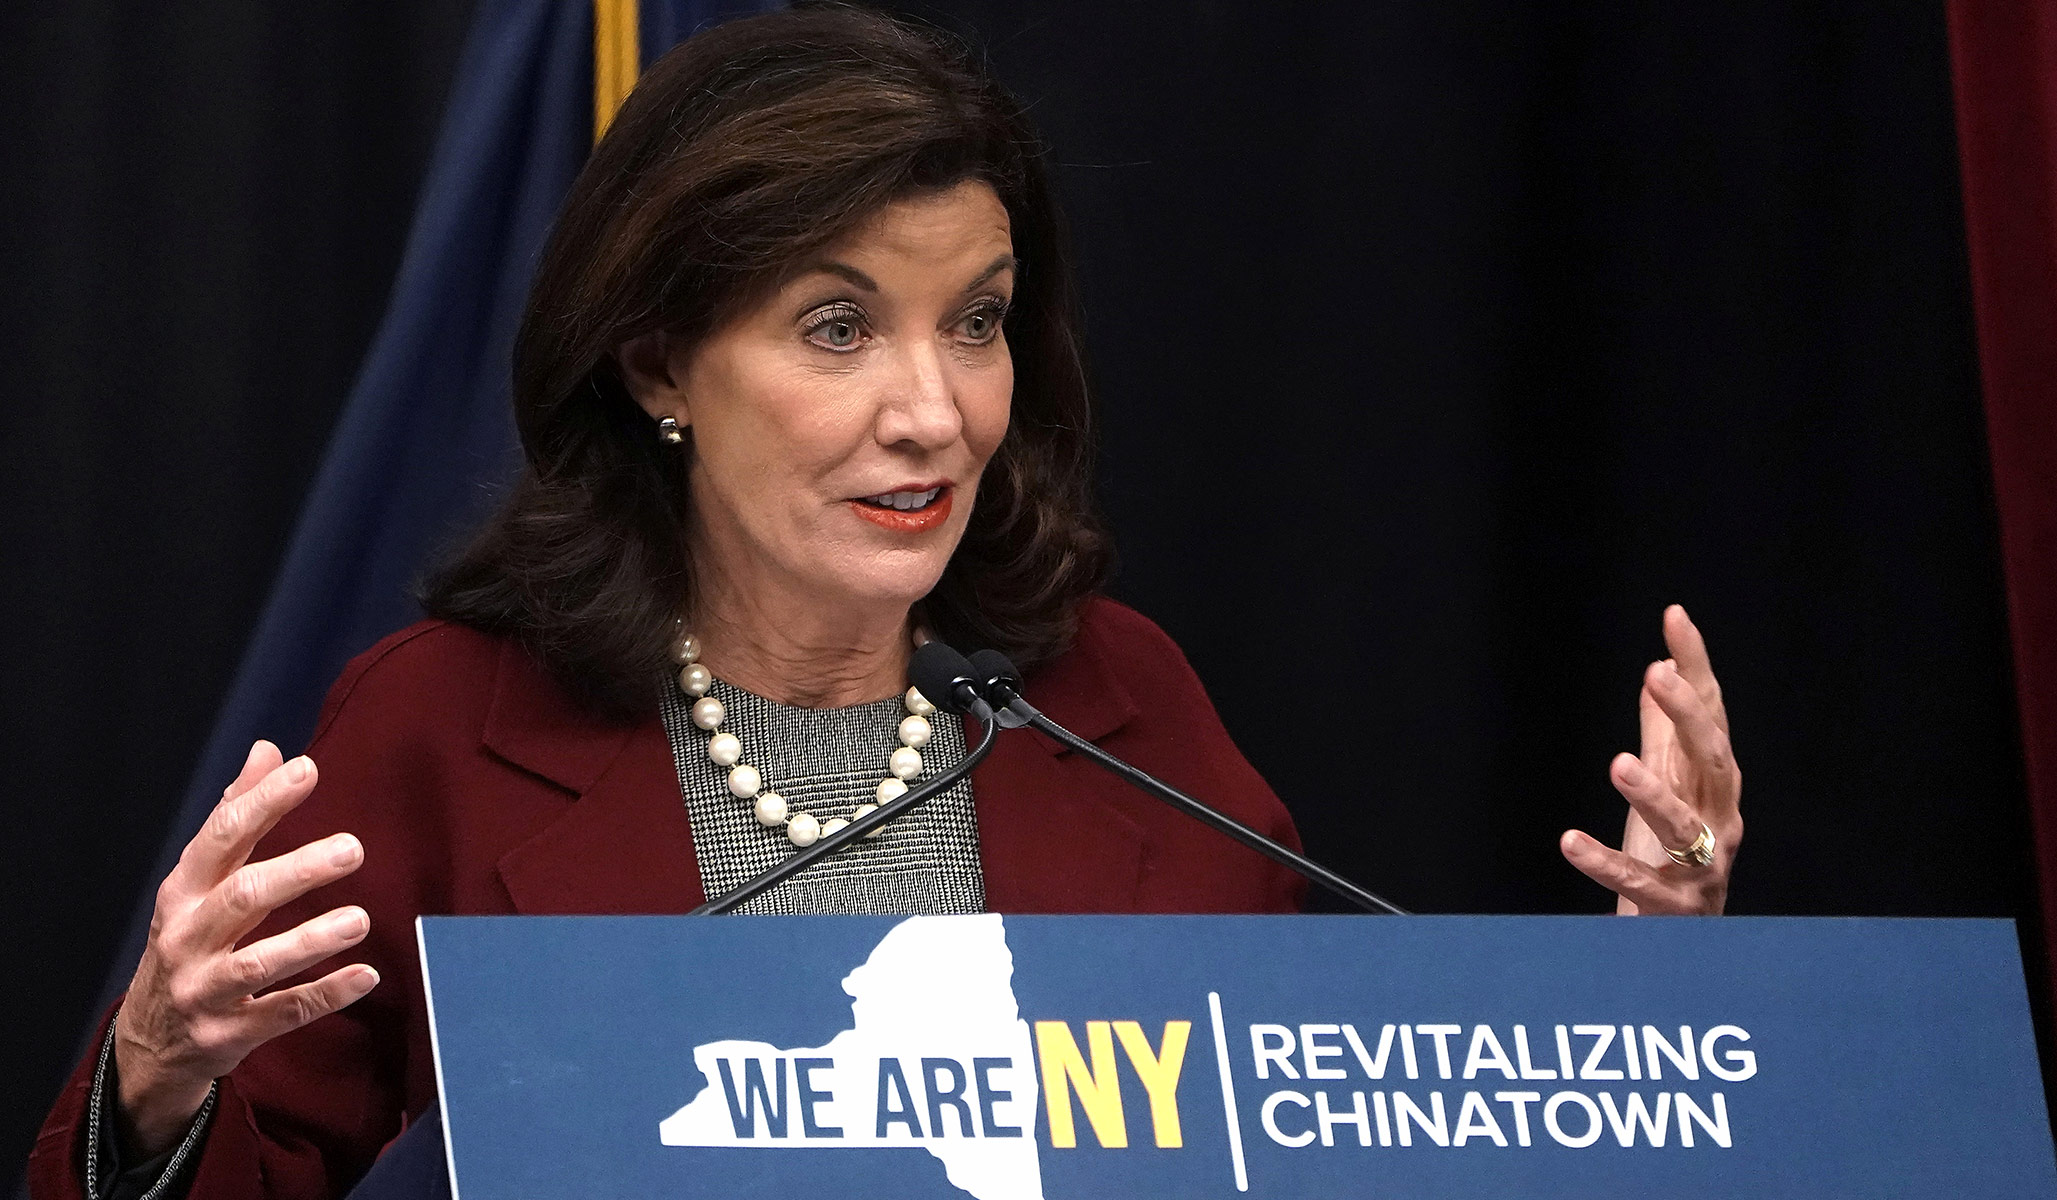 Governor Hochul Extends New York Mask Mandate after Court Reinstates It